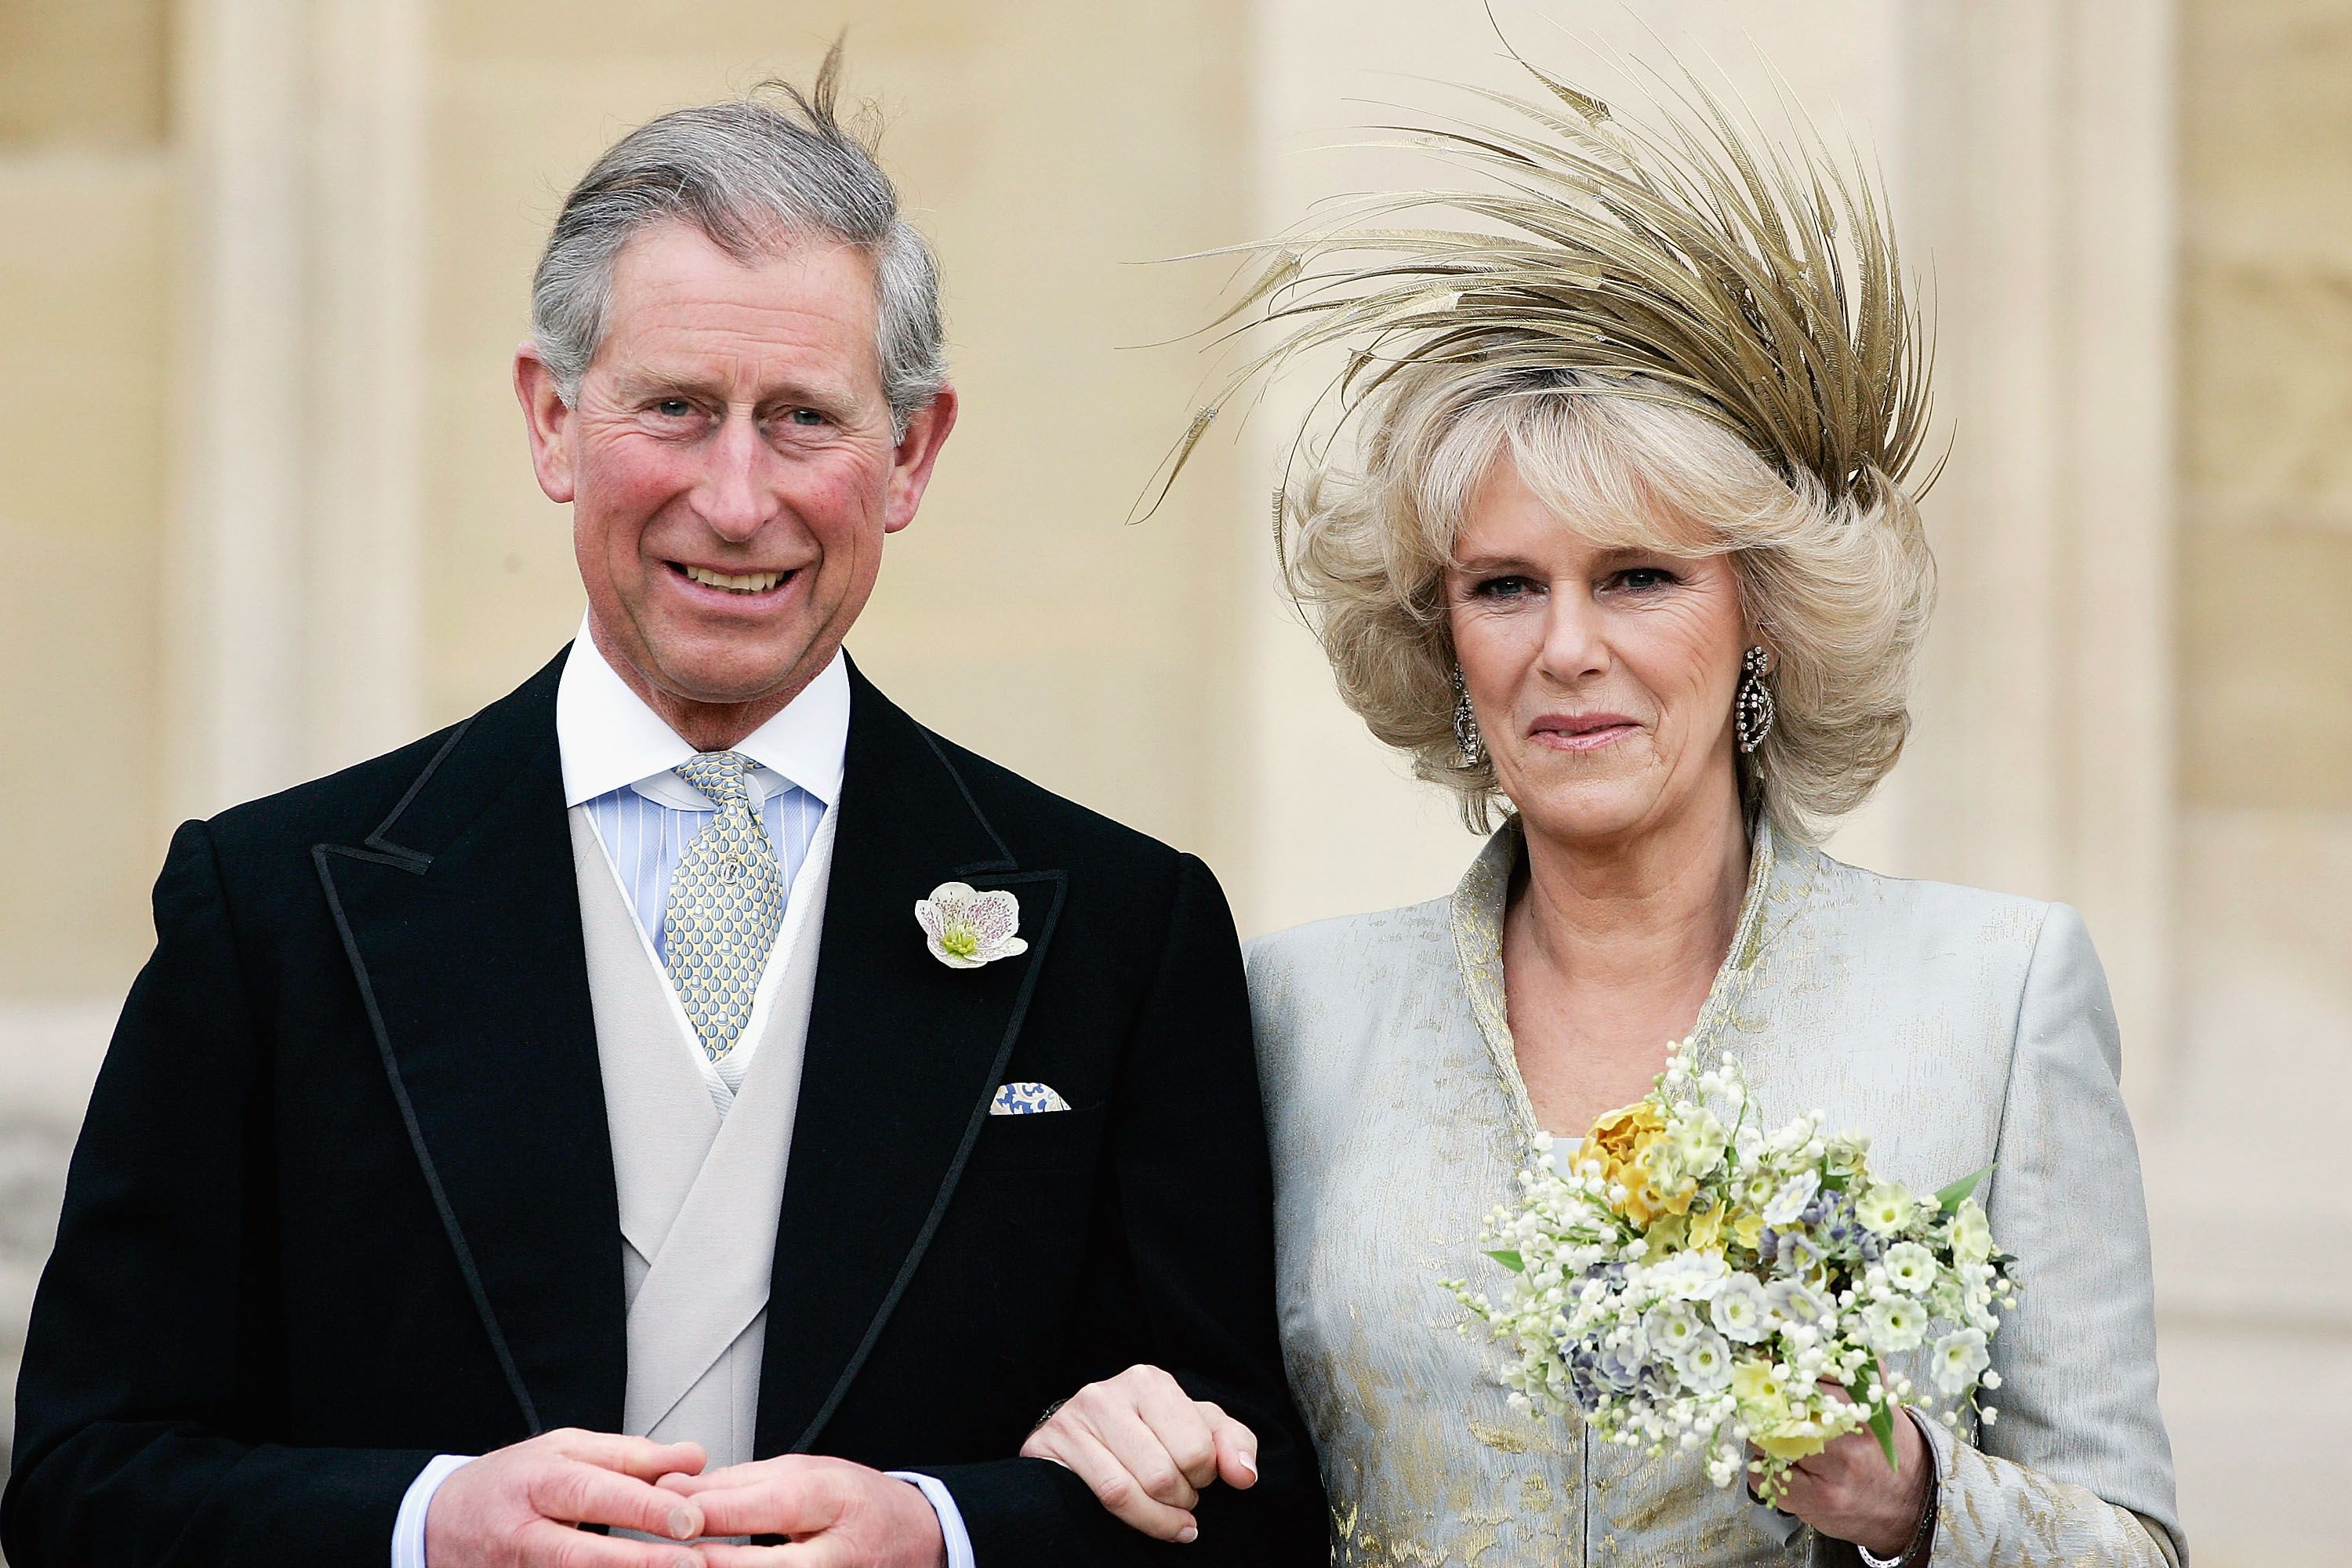 Prince Charles and Duchess Camilla at the Service of Prayer and Dedication blessing their marriage at Windsor Castle on April 9, 2005, in Berkshire, England | Photo: Tim Graham Photo Library/Getty Images